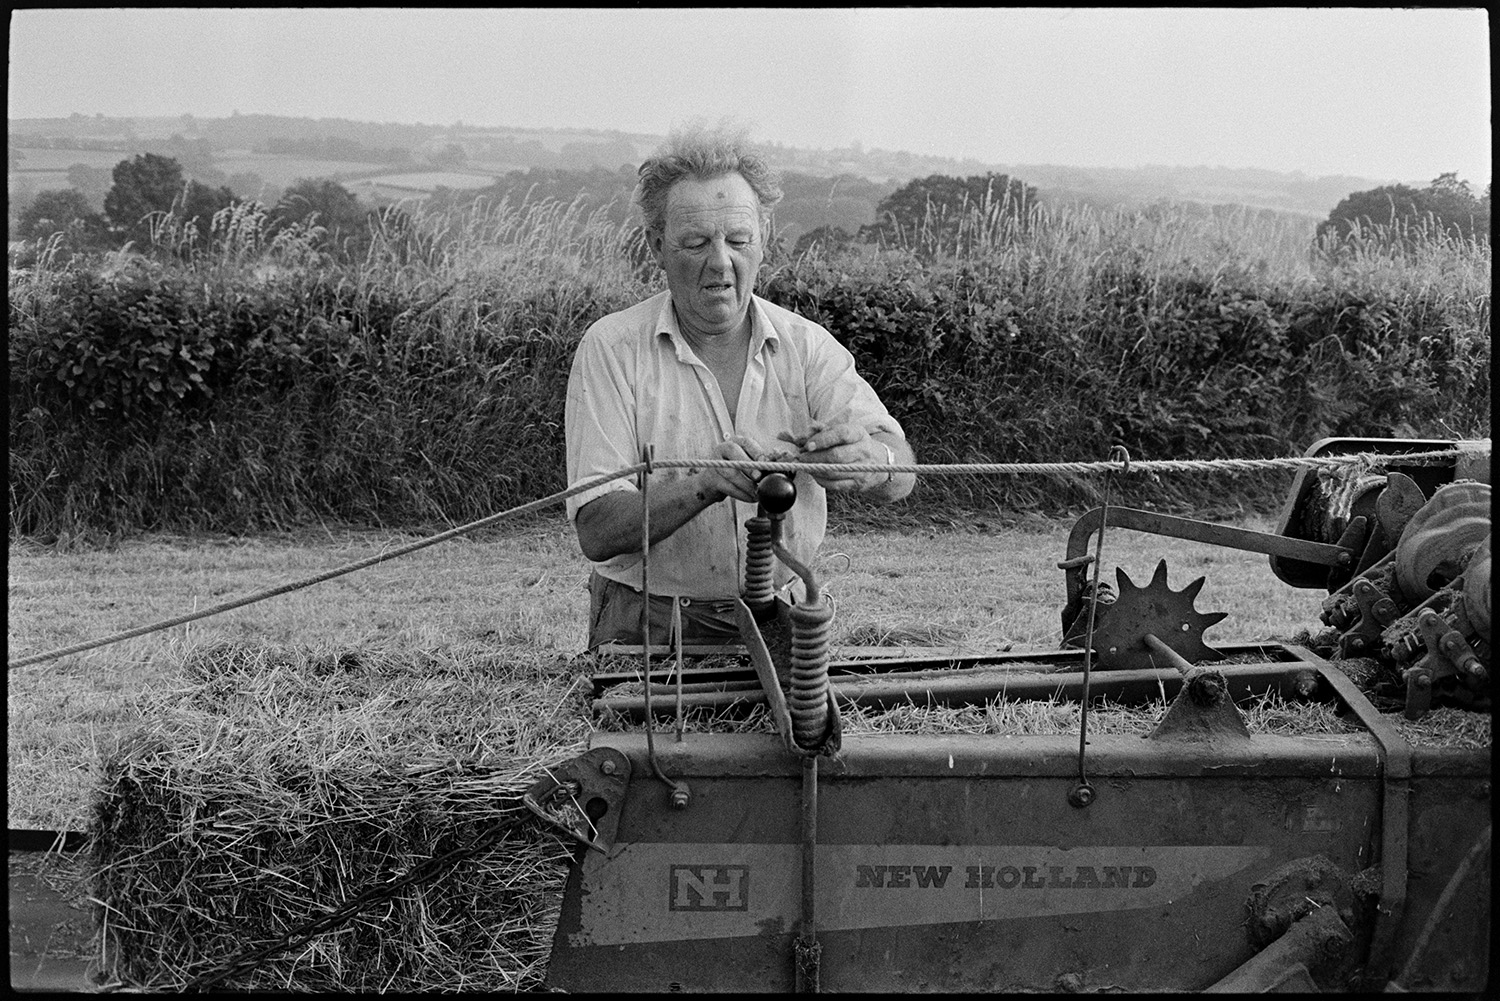 Farmers baling hay. 
[John Ward checking his baler in a field at Parsonage, Iddesleigh. A hay bale can be seen in the baler.]